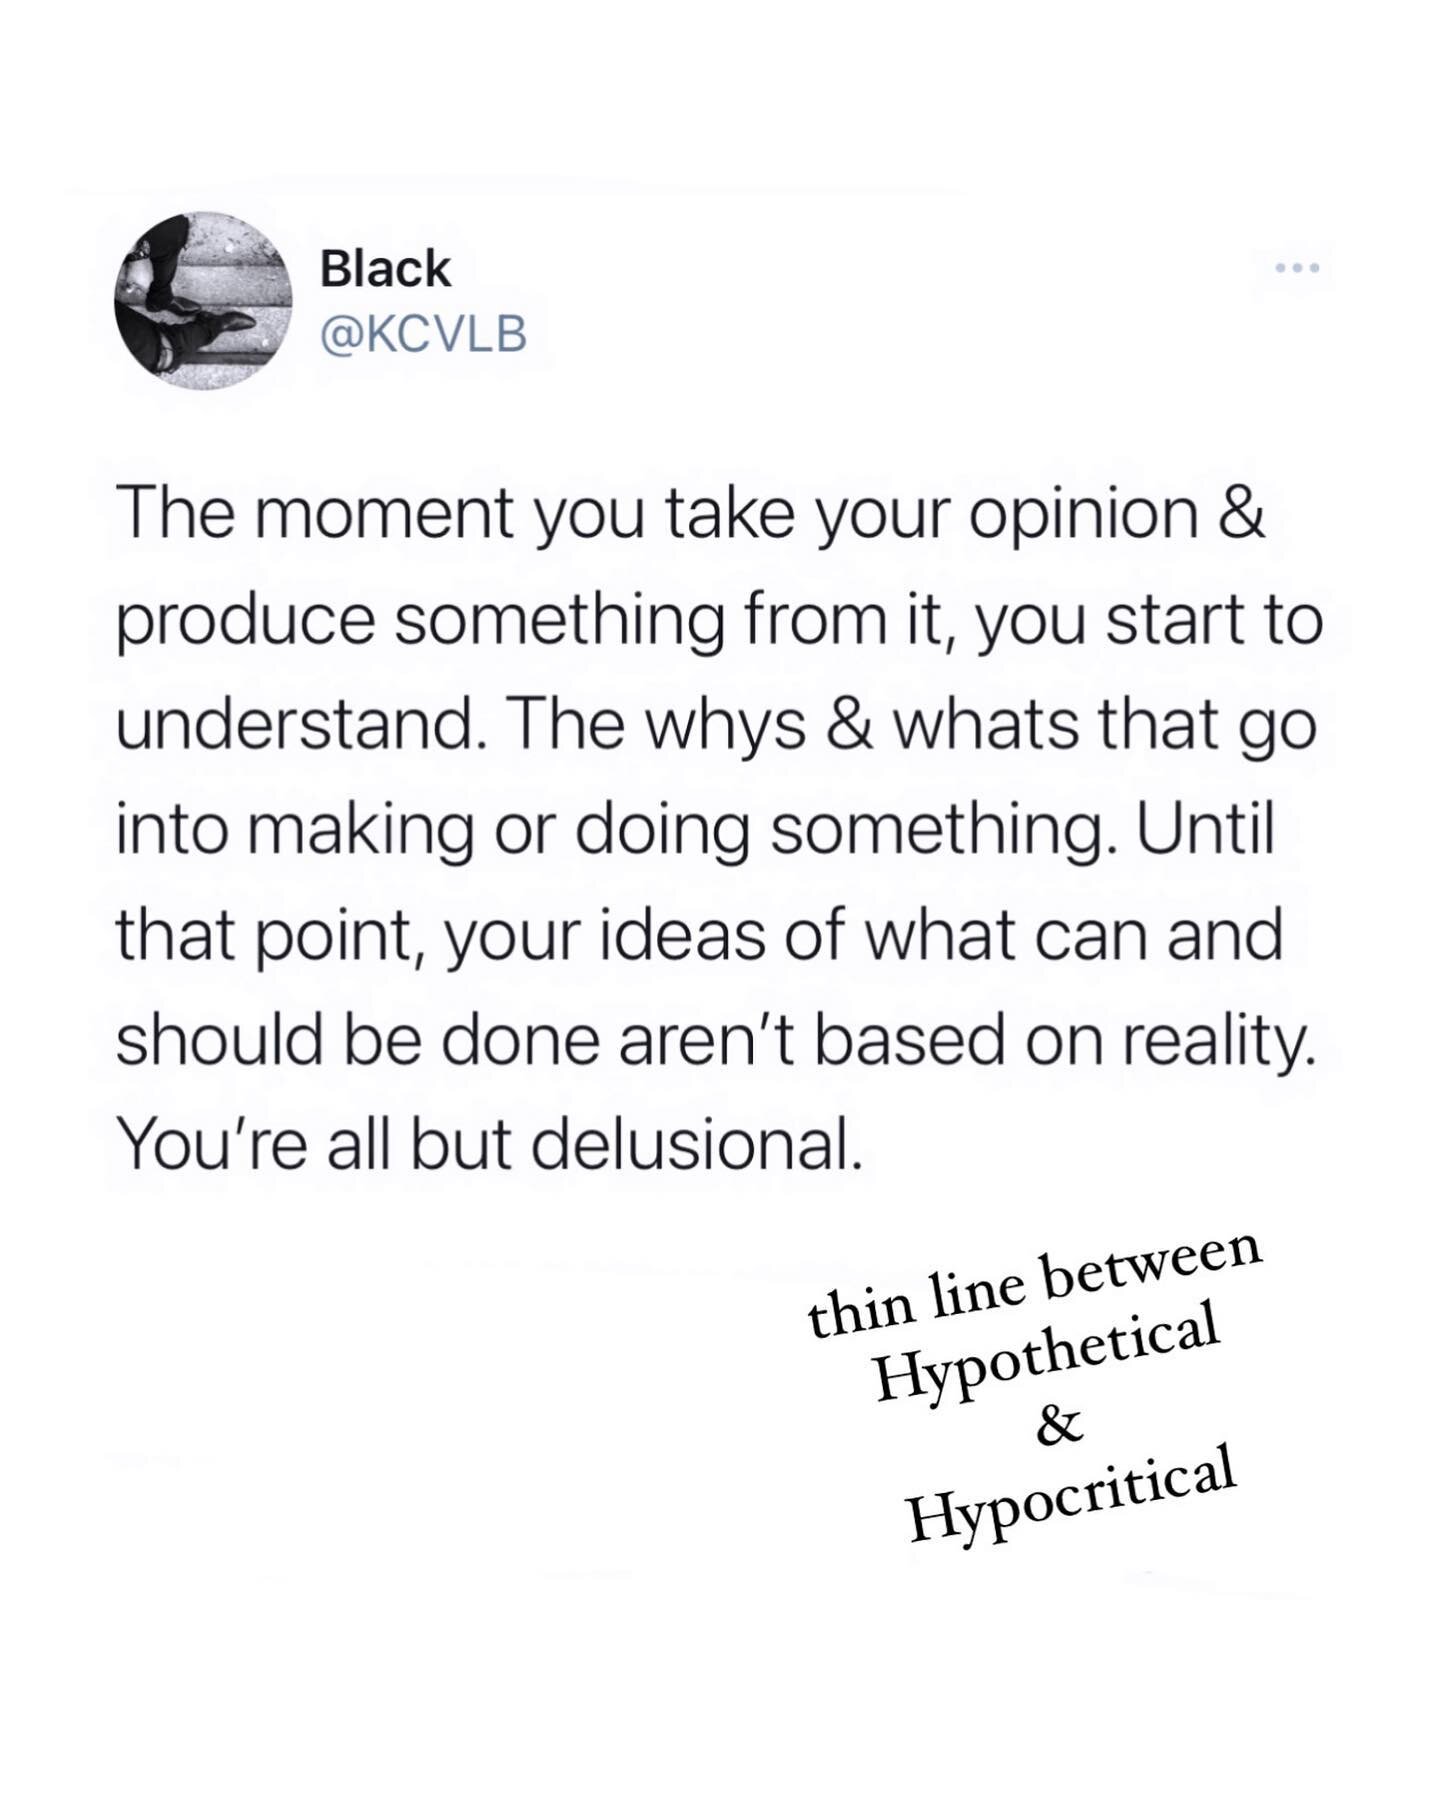 Playing both sides of that line often sounds like &ldquo;I would have&hellip;&rdquo; &ldquo;why didn&rsquo;t they&hellip;&rdquo; etc. 
PUT YOUR OPINION INTO YOUR WORK.